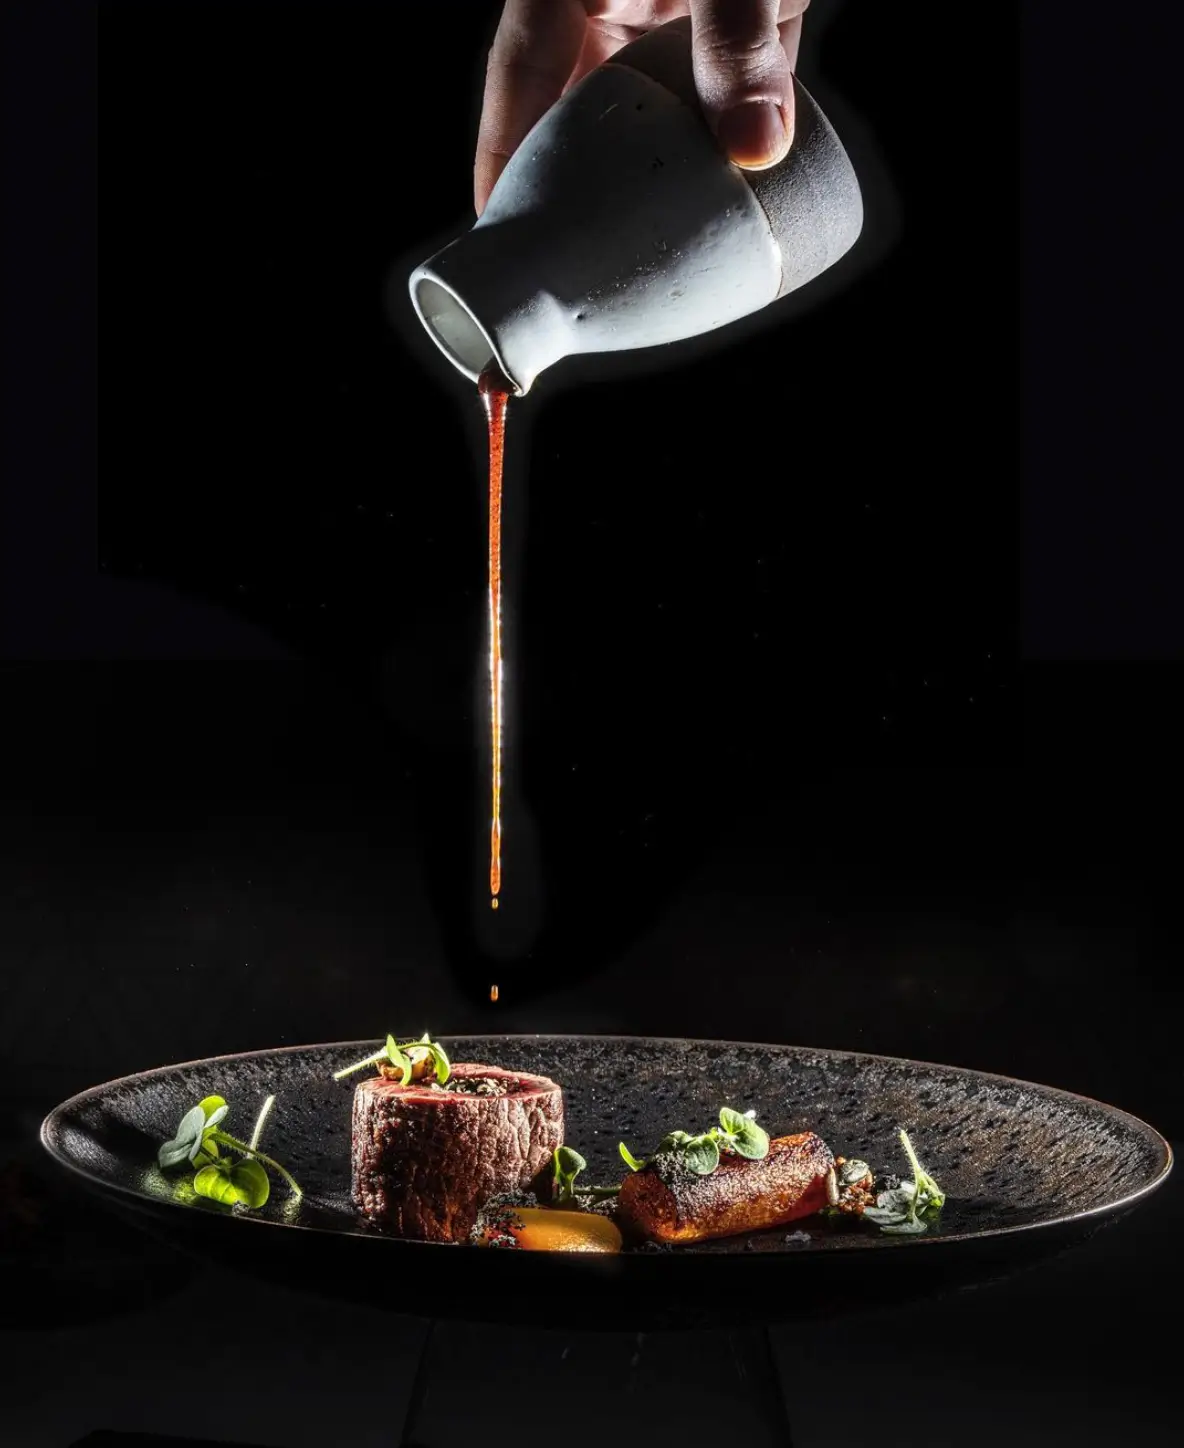 A hand pouring sauce over a gourmet dish at Restaurant H, highlighting fine dining at an affordable Michelin star restaurant in Paris